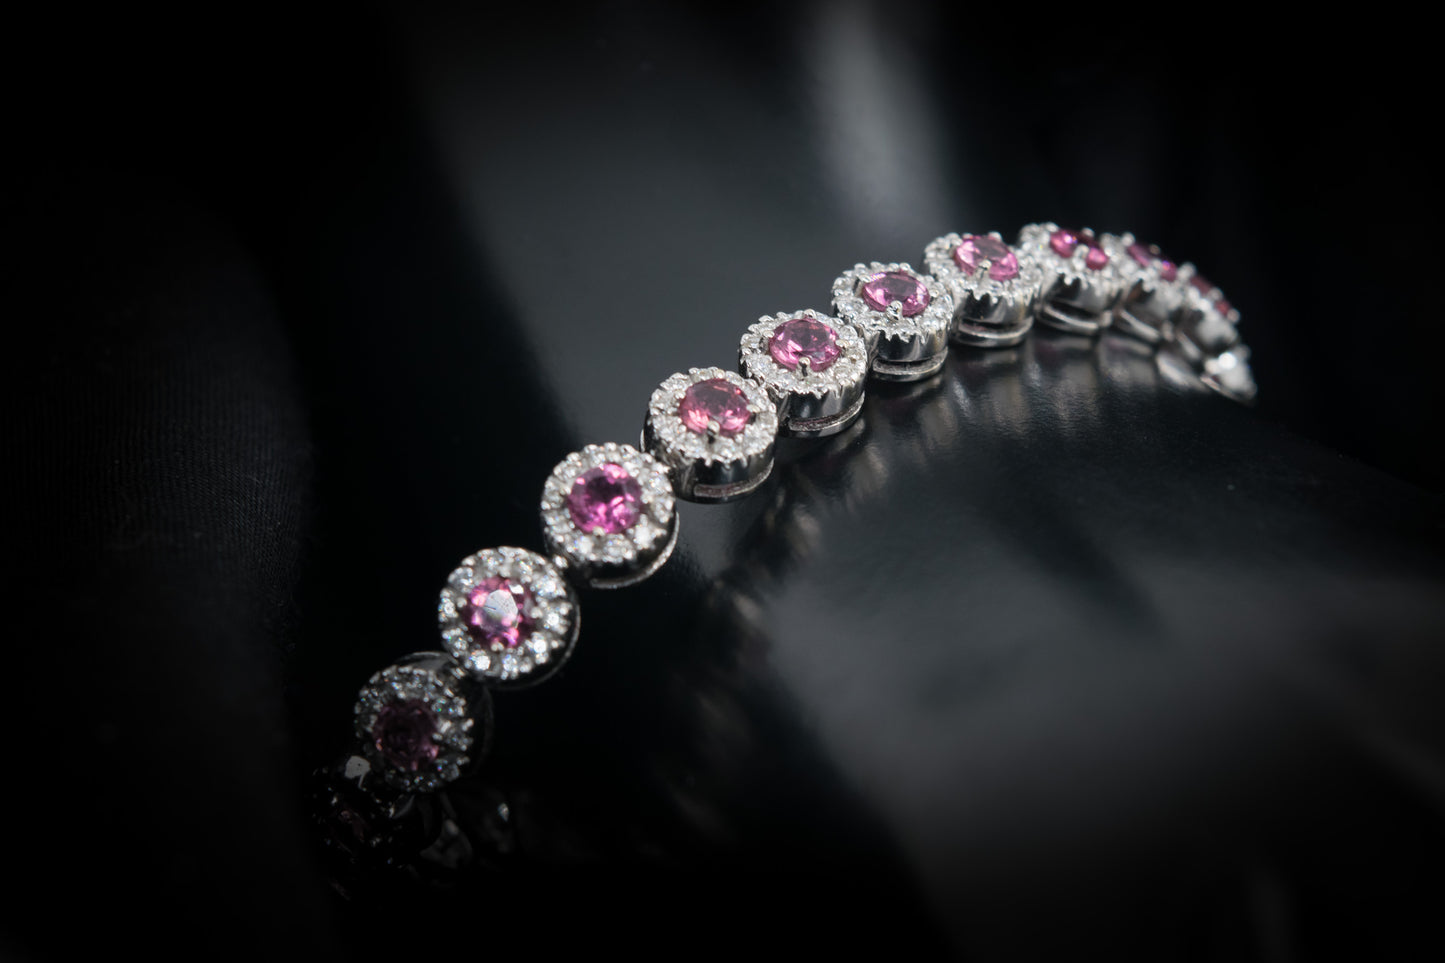 18kt WG Bracelet with Pink Sapphire and Diamond.